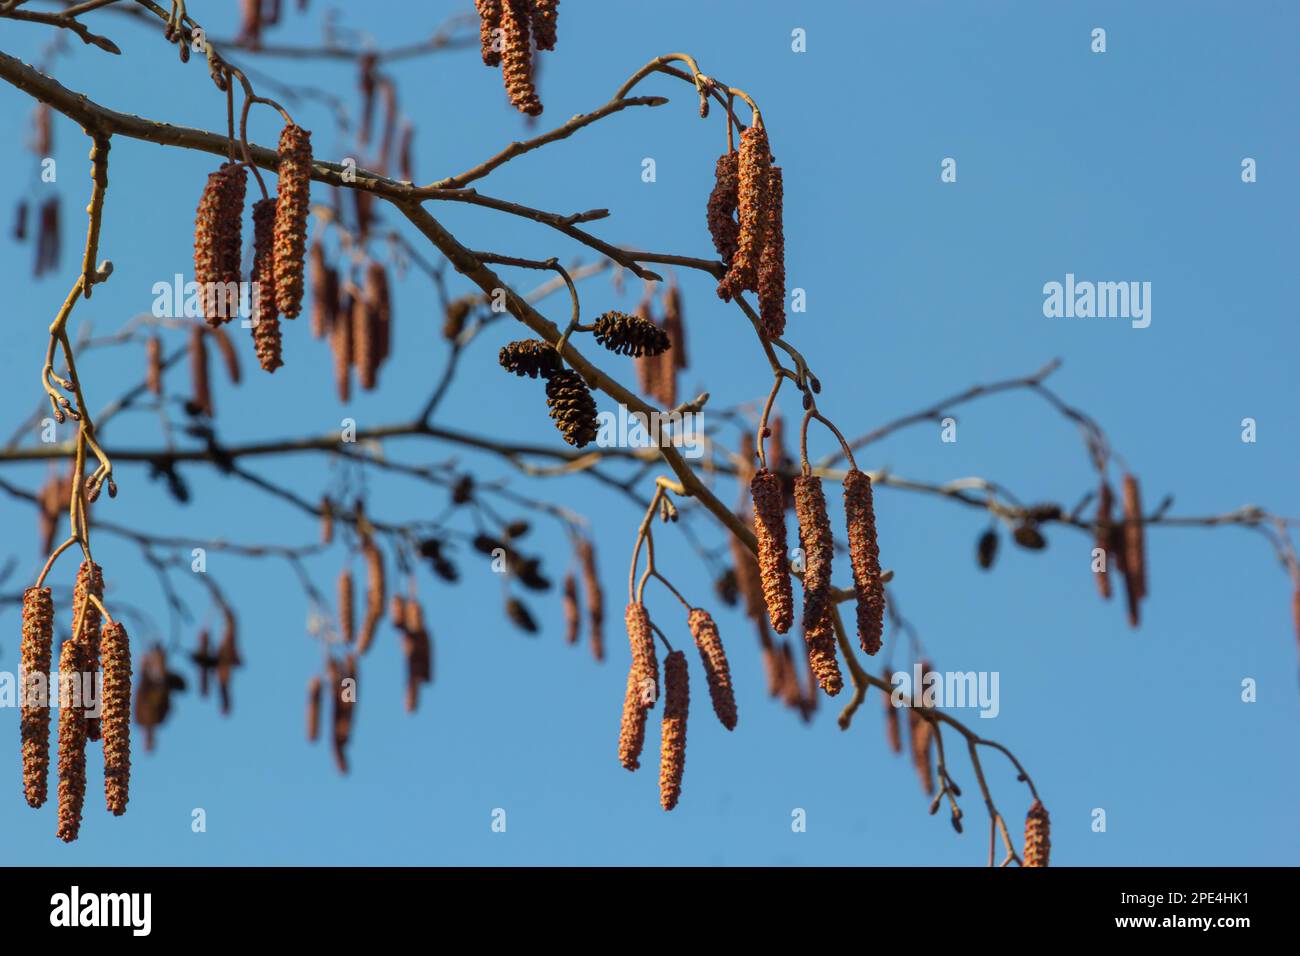 European alder, Alnus glutinosa, branch with mature female catkins, blooming male catkins and buds on soft background, selective focus. Stock Photo